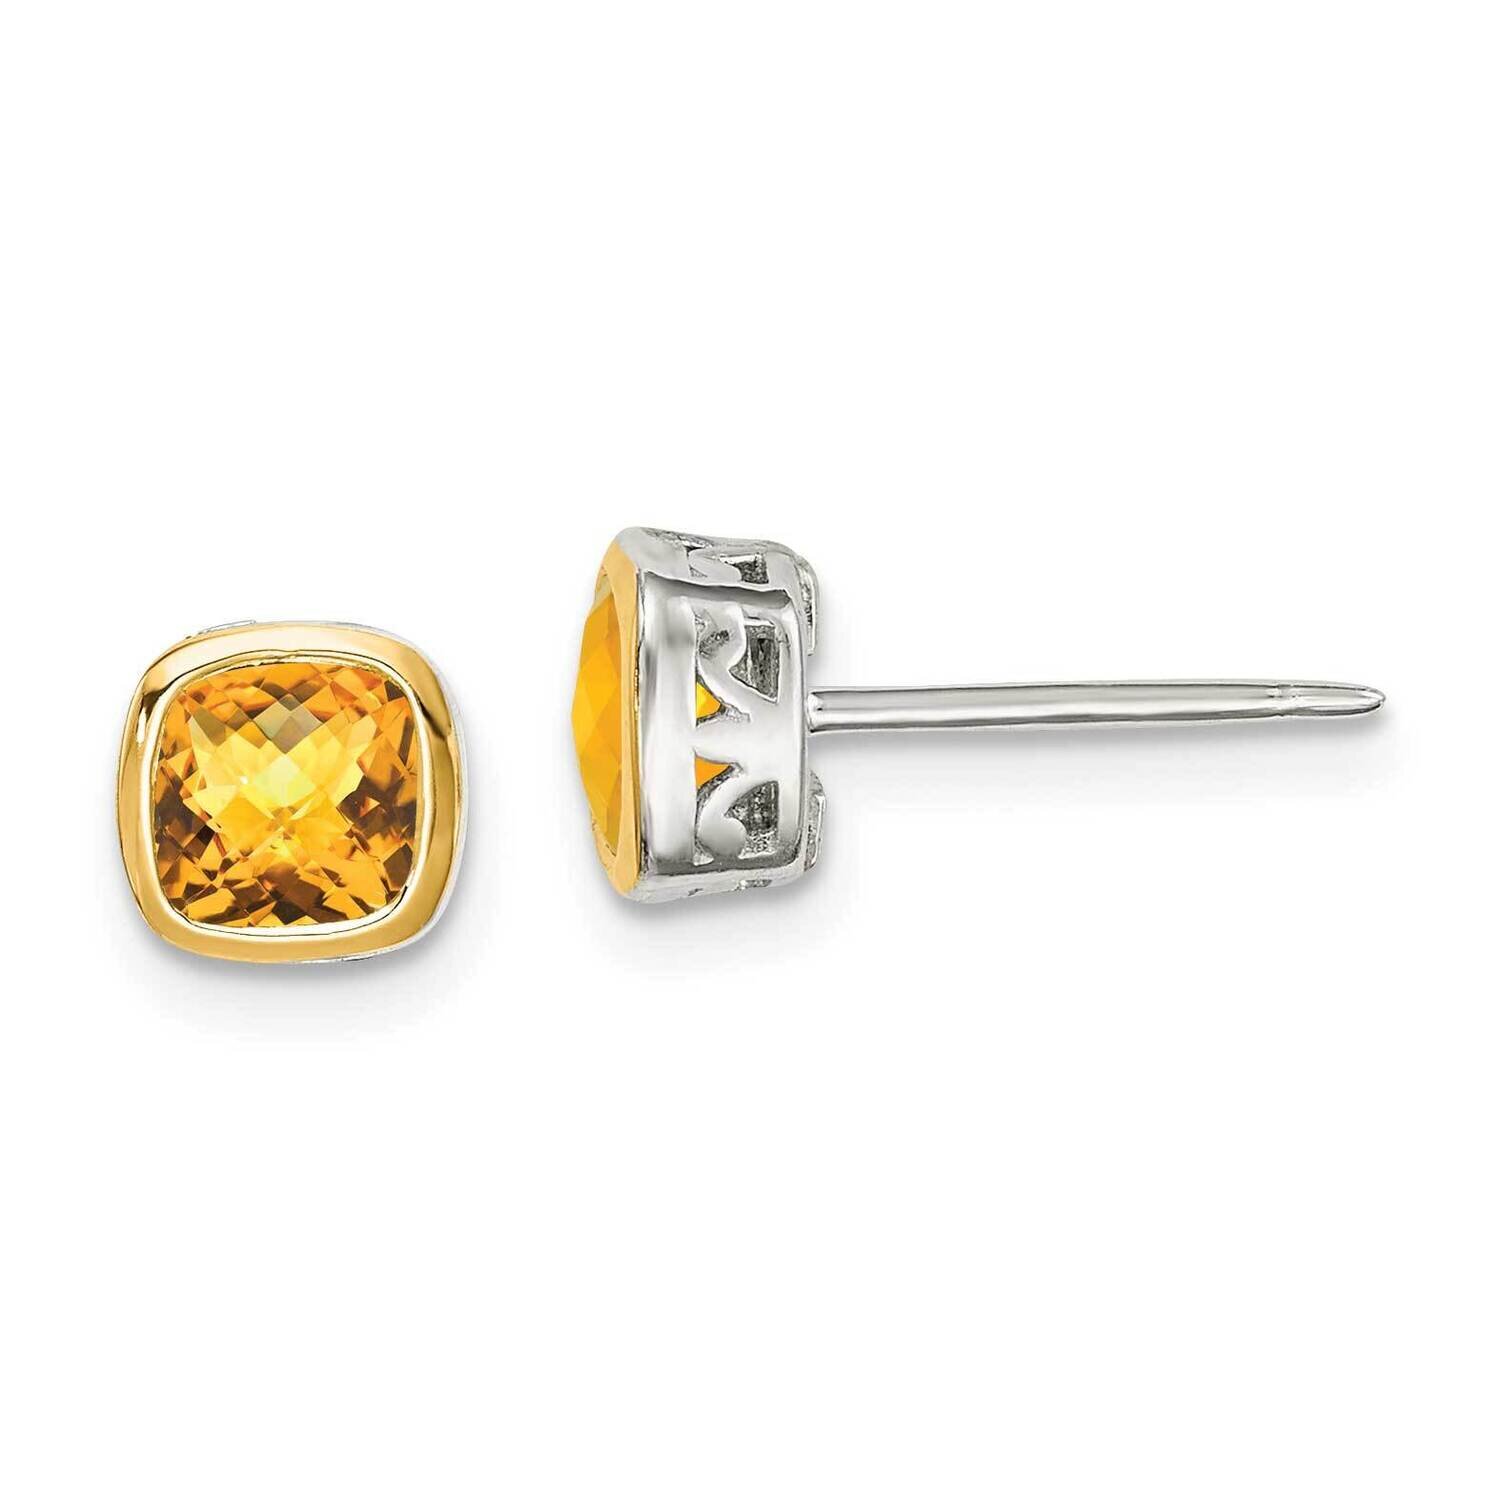 Citrine Square Stud Earrings Sterling Silver with 14k Gold Accent QTC1733